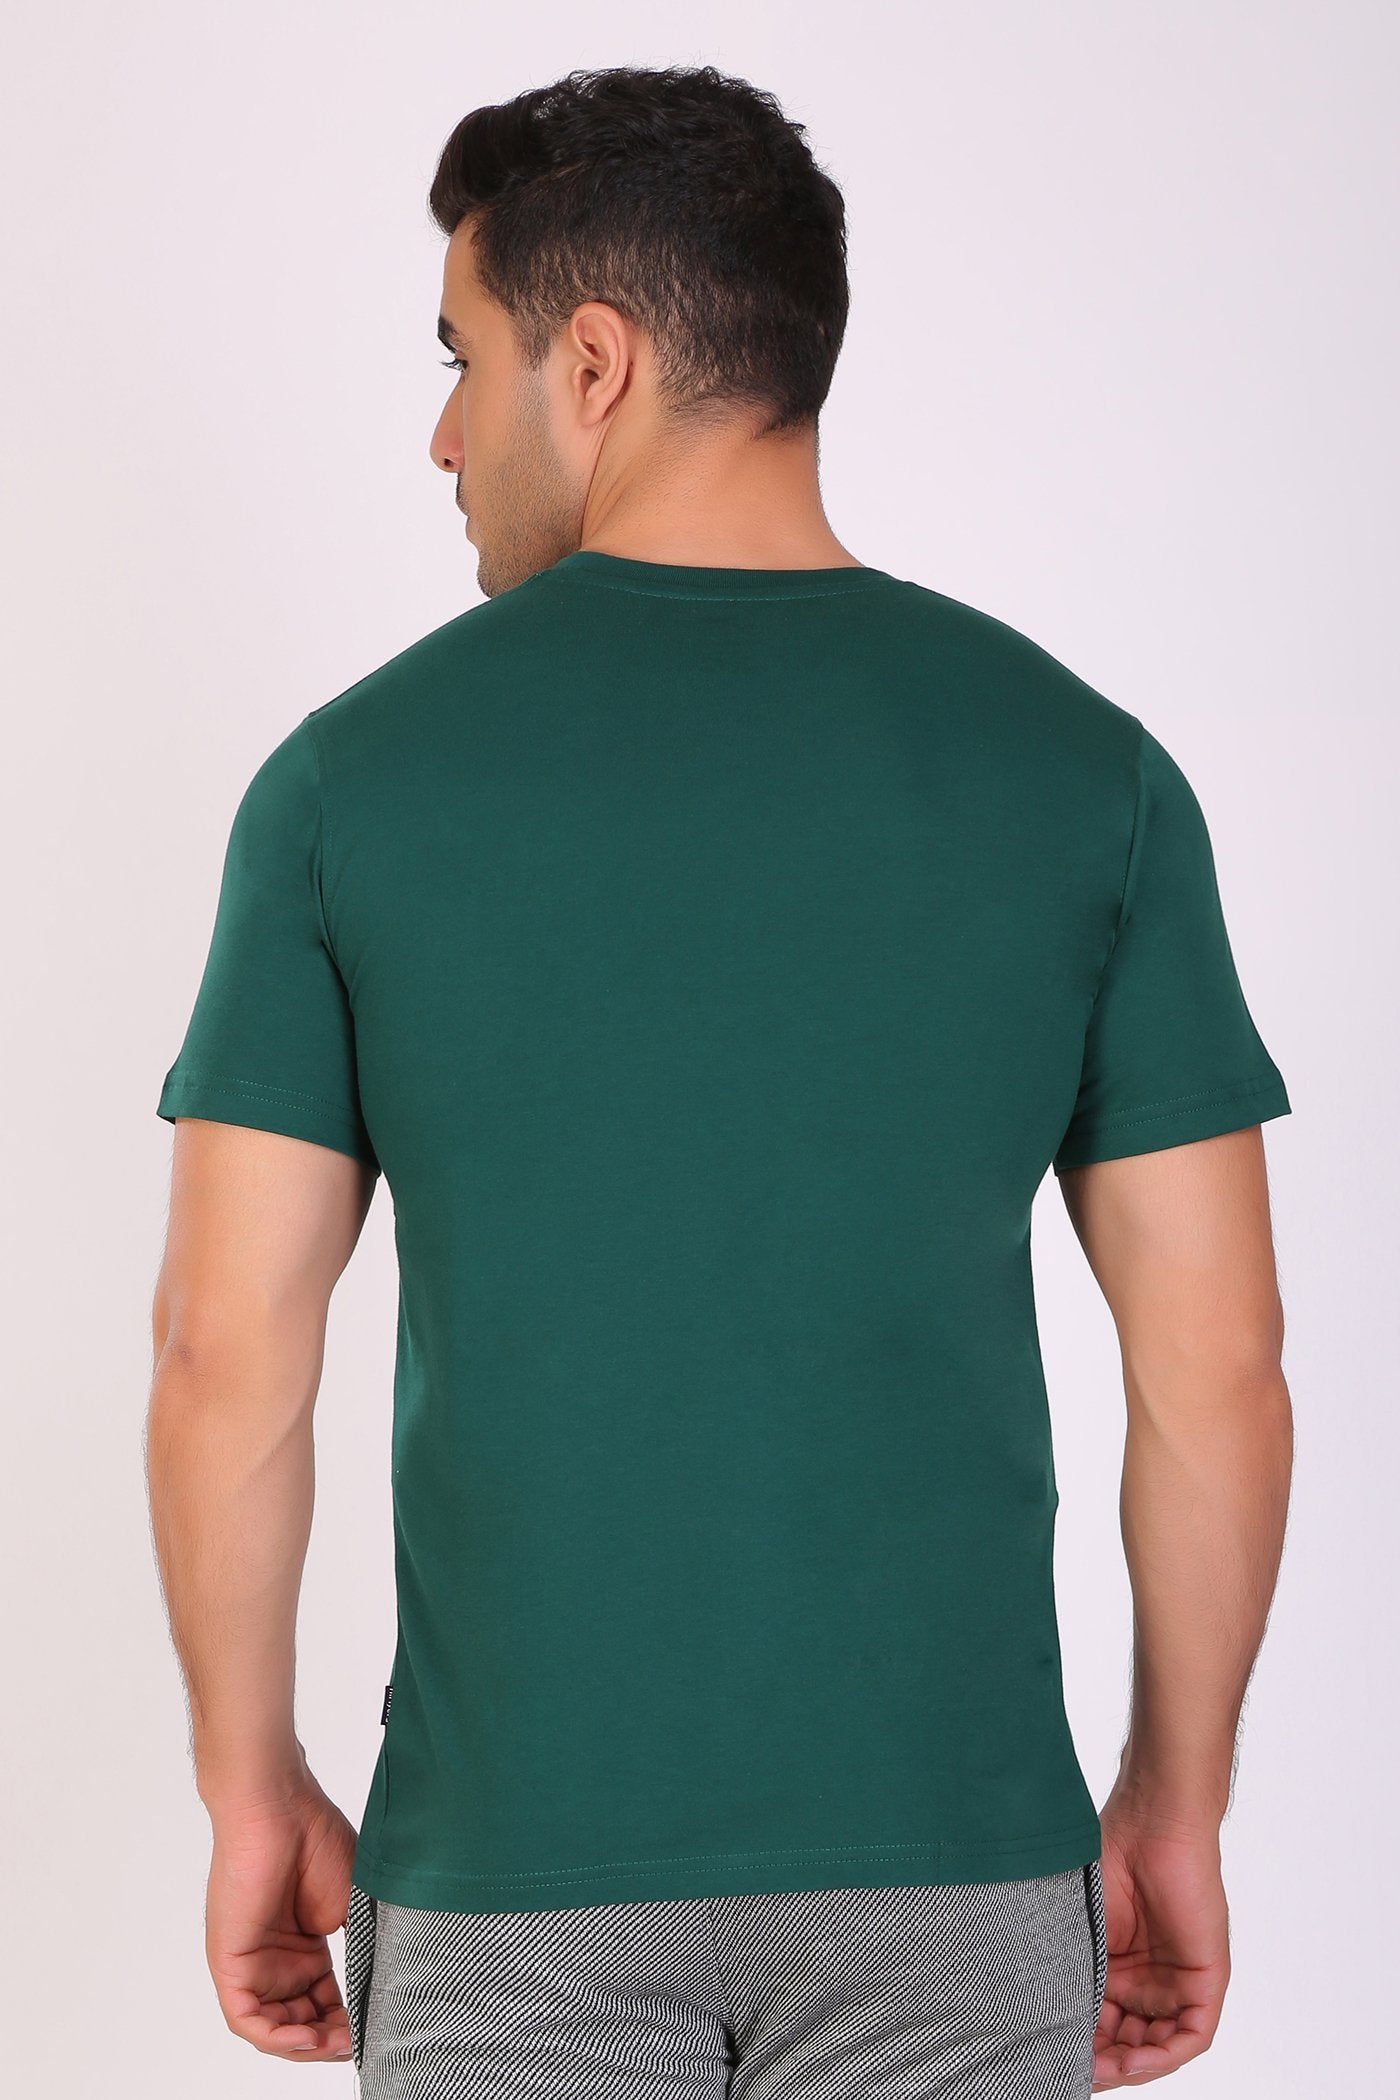 Hiflyers Men Slim Fit Solid Pack Of 3 Premium RN T-Shirt Teal Blue::Eden Green::Ted